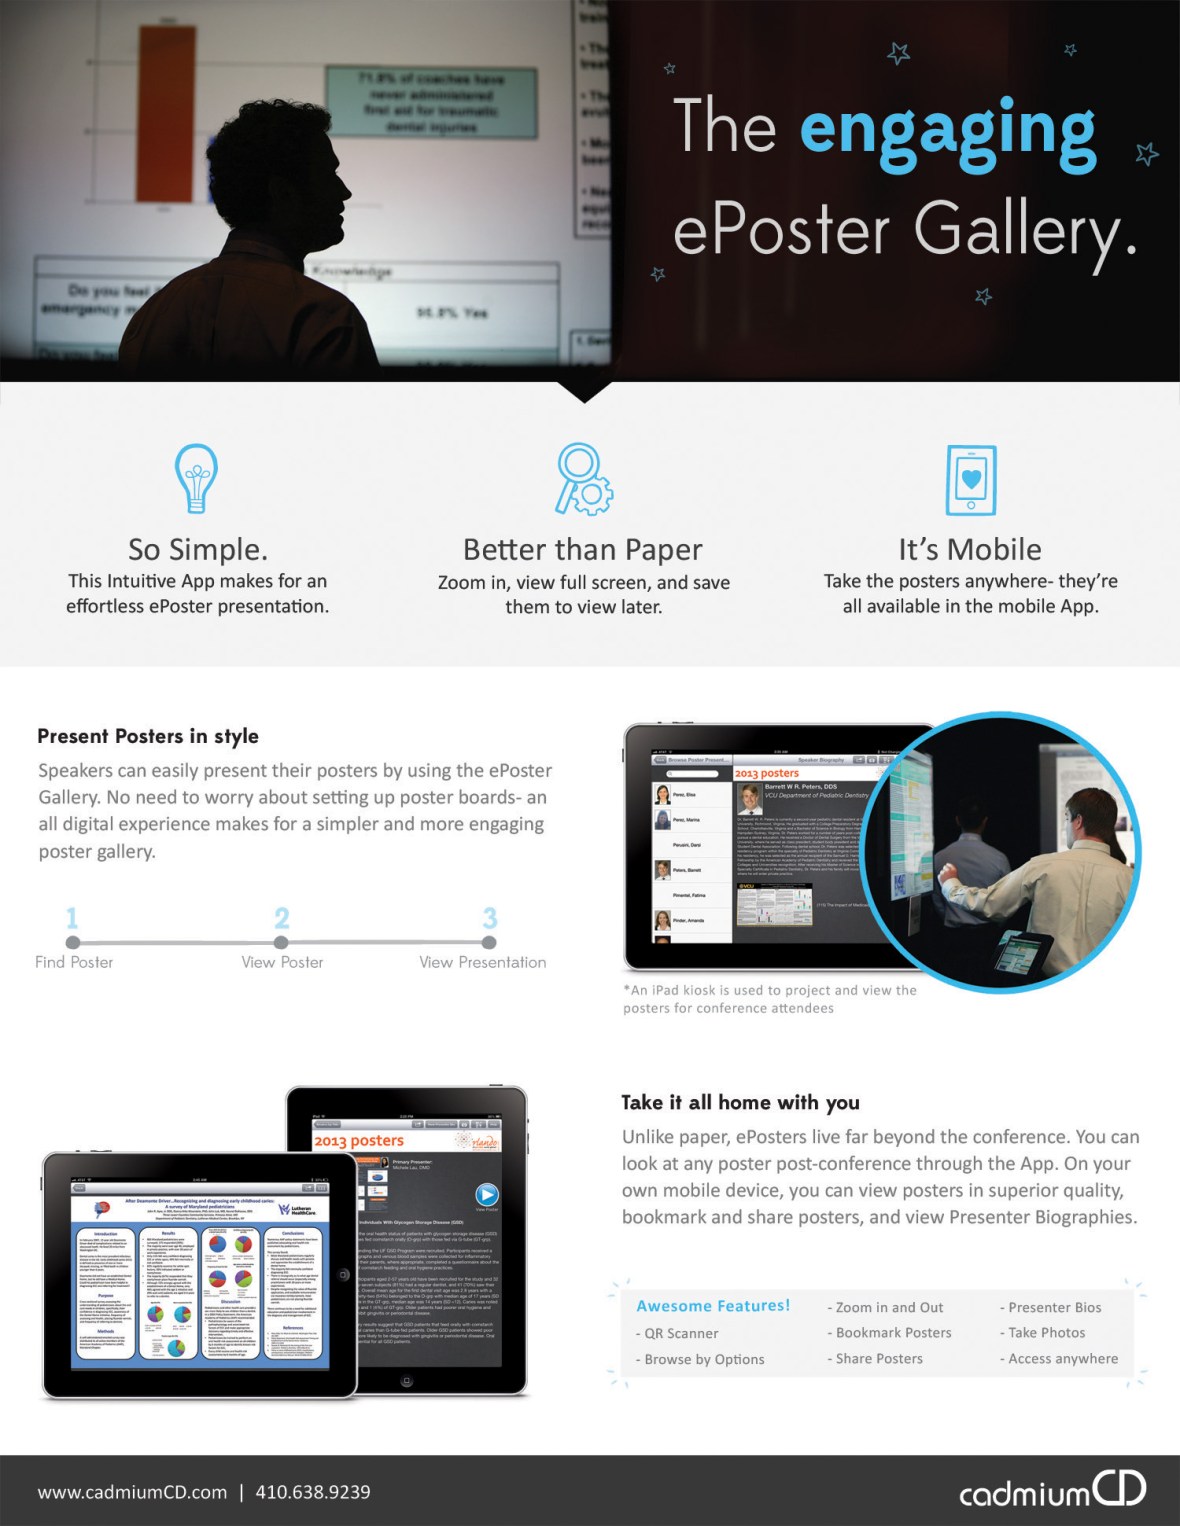 The eventScribe ePoster Gallery makes conference poster galleries digital, searchable, and fun! Attendees can access the ePoster gallery from home AND take notes, draw marks, and highlight important information directly on the ePoster.